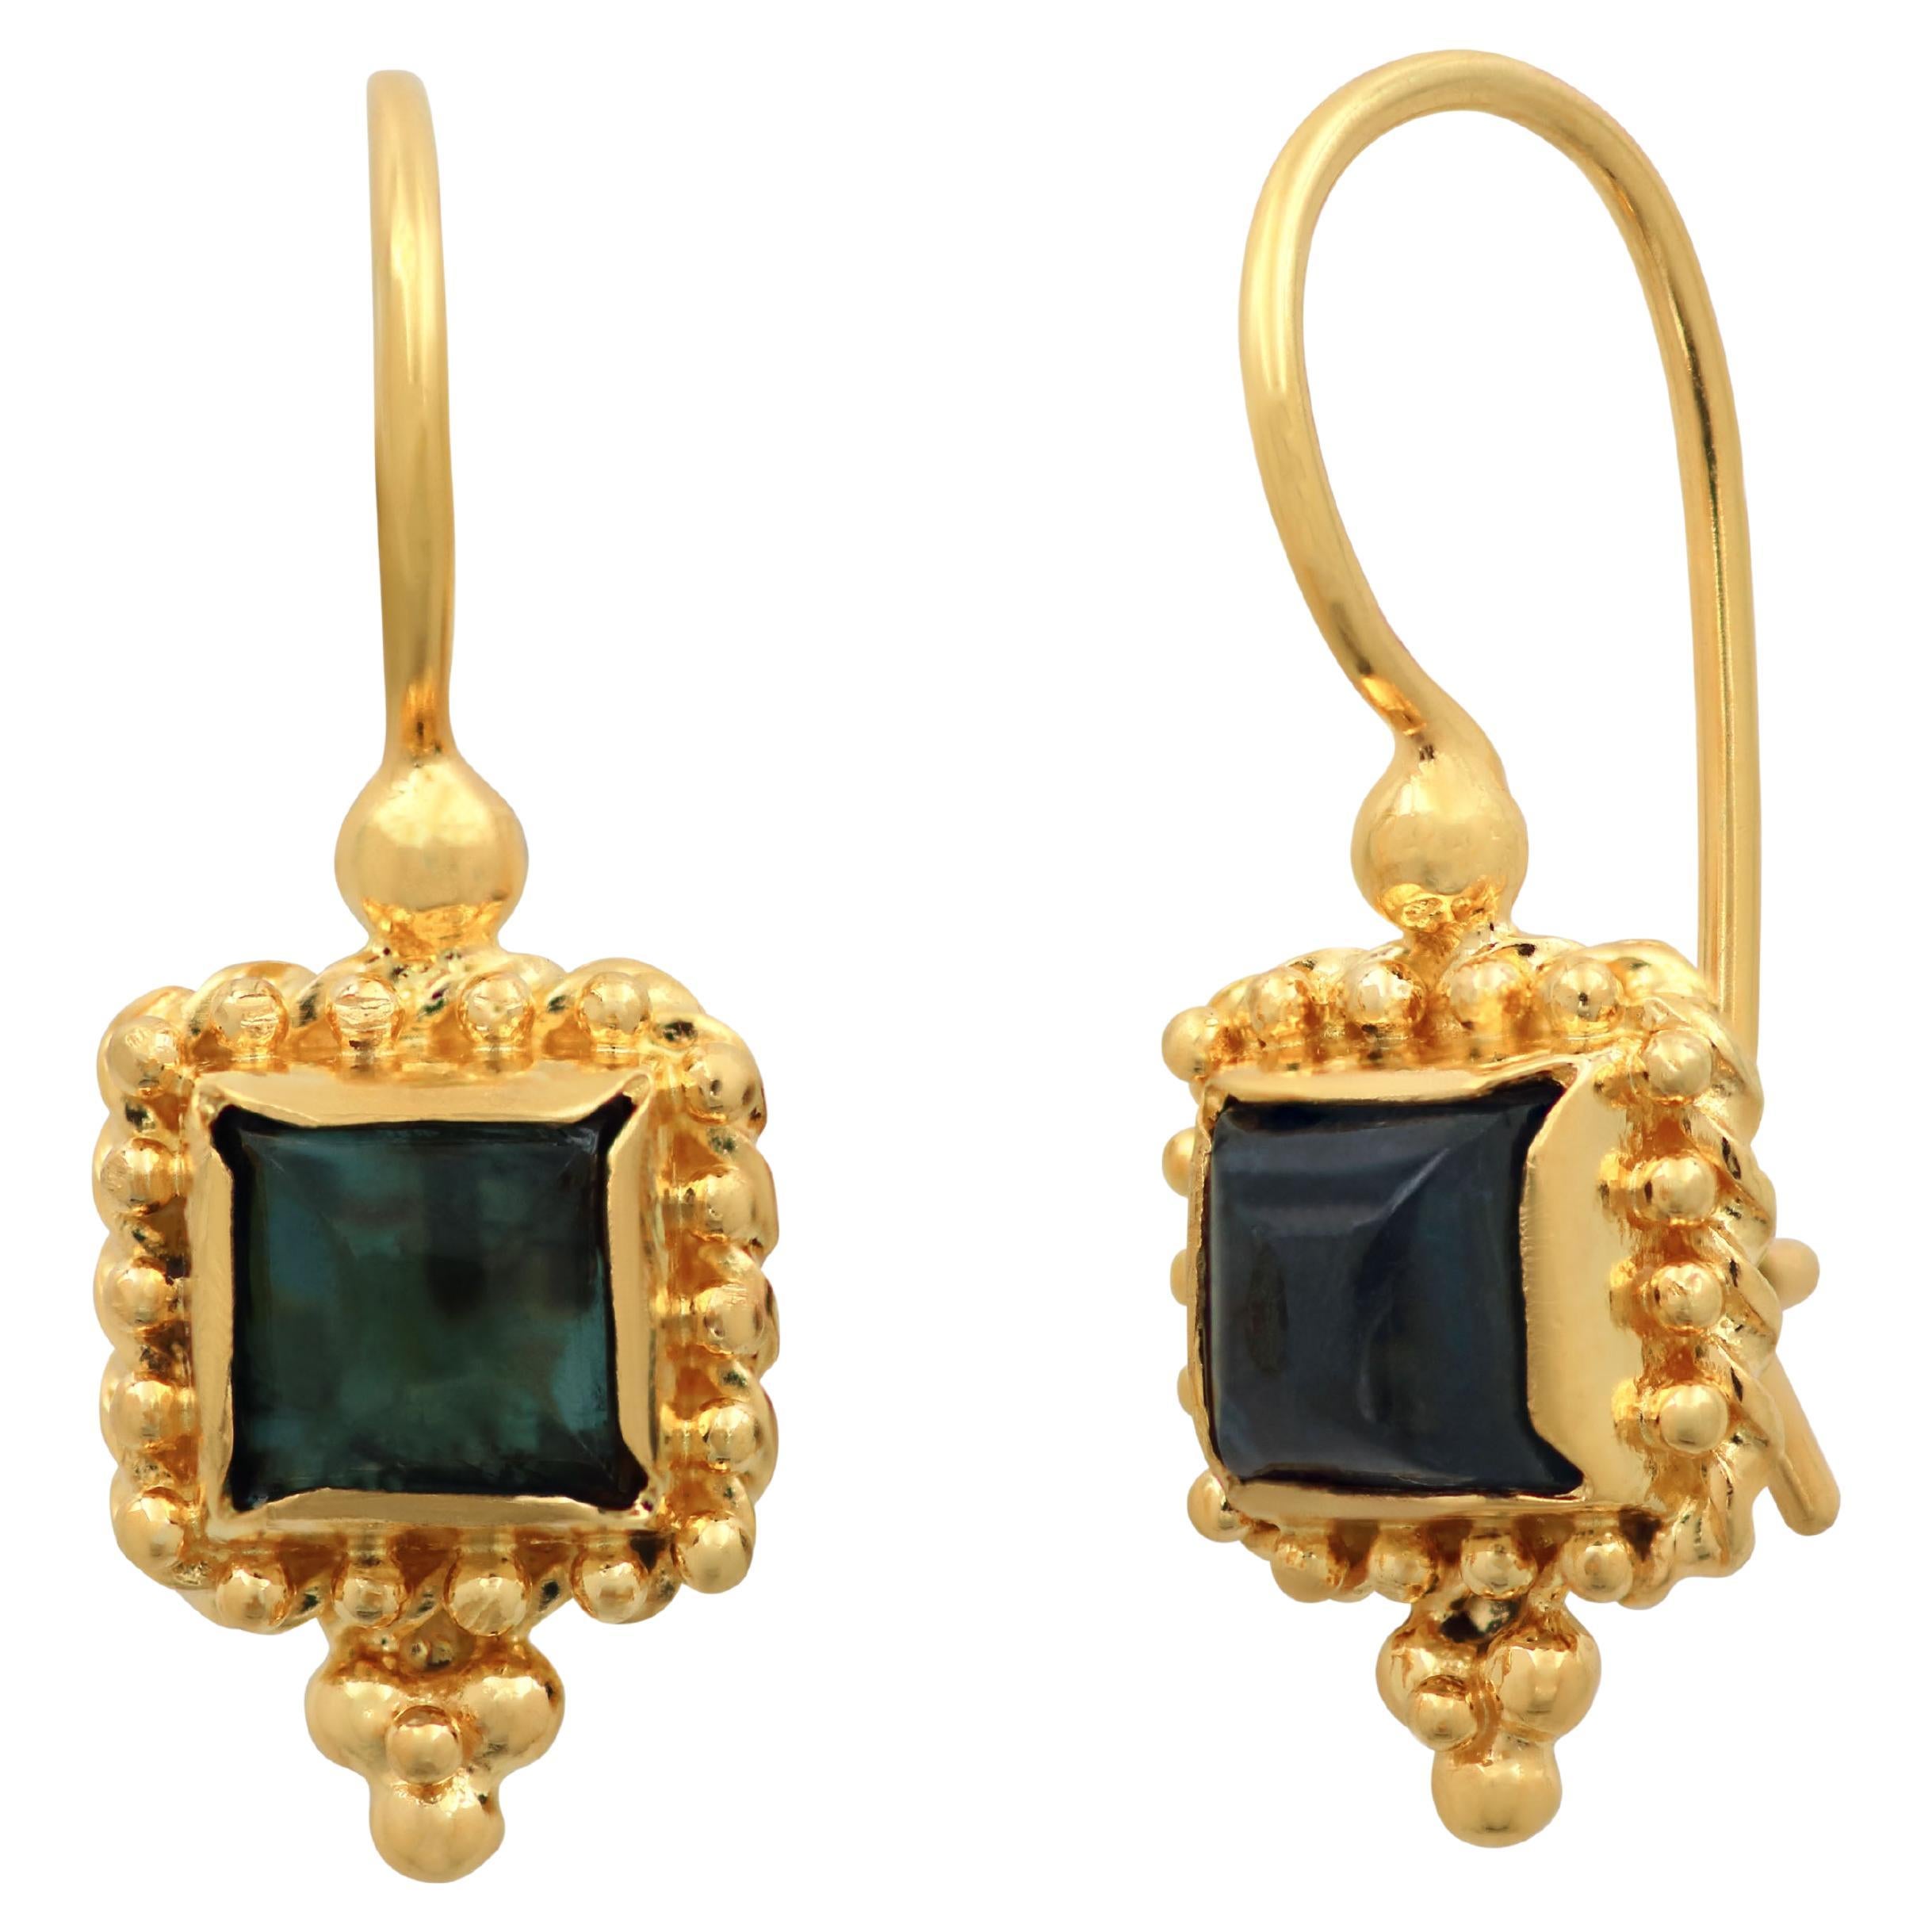 Dimos 18k Yellow Gold Filigree Earrings with Tourmaline For Sale